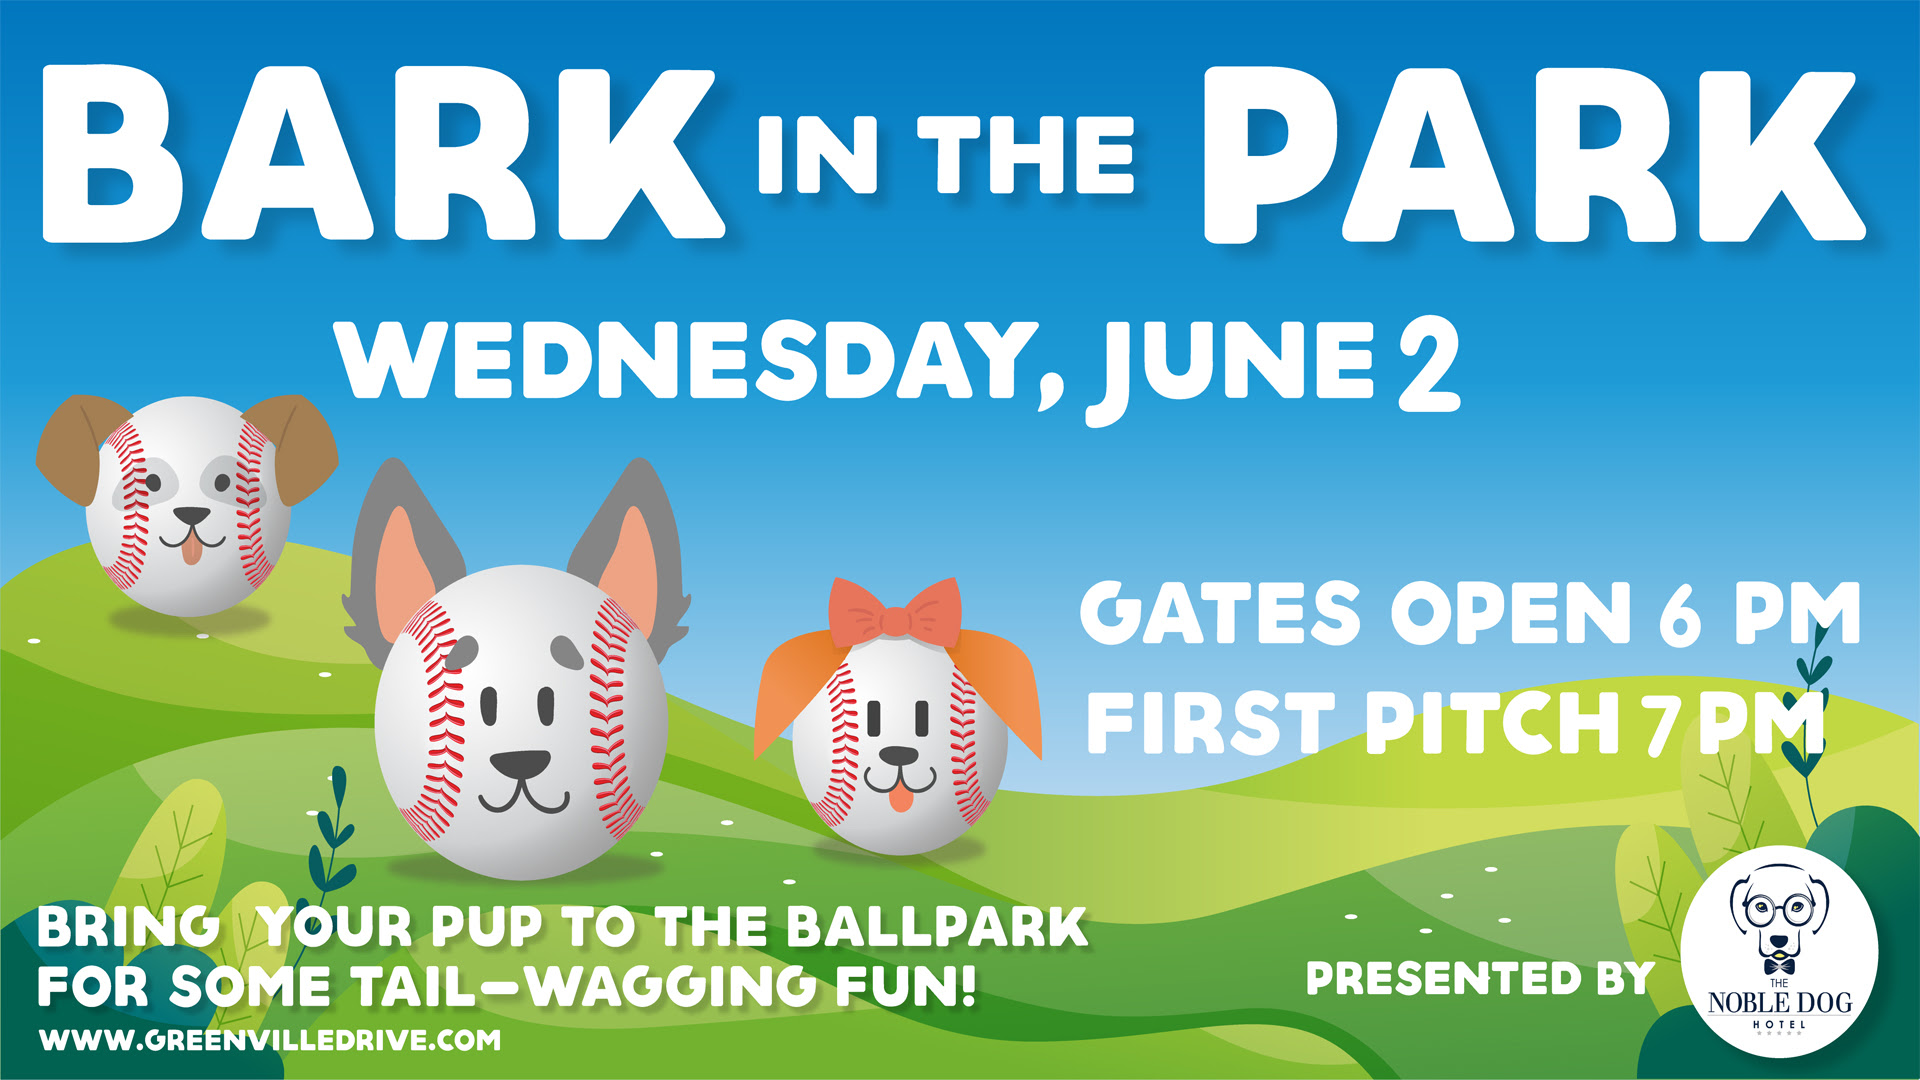 Bark in the Park at Fluor Field on Saturday, April 20th